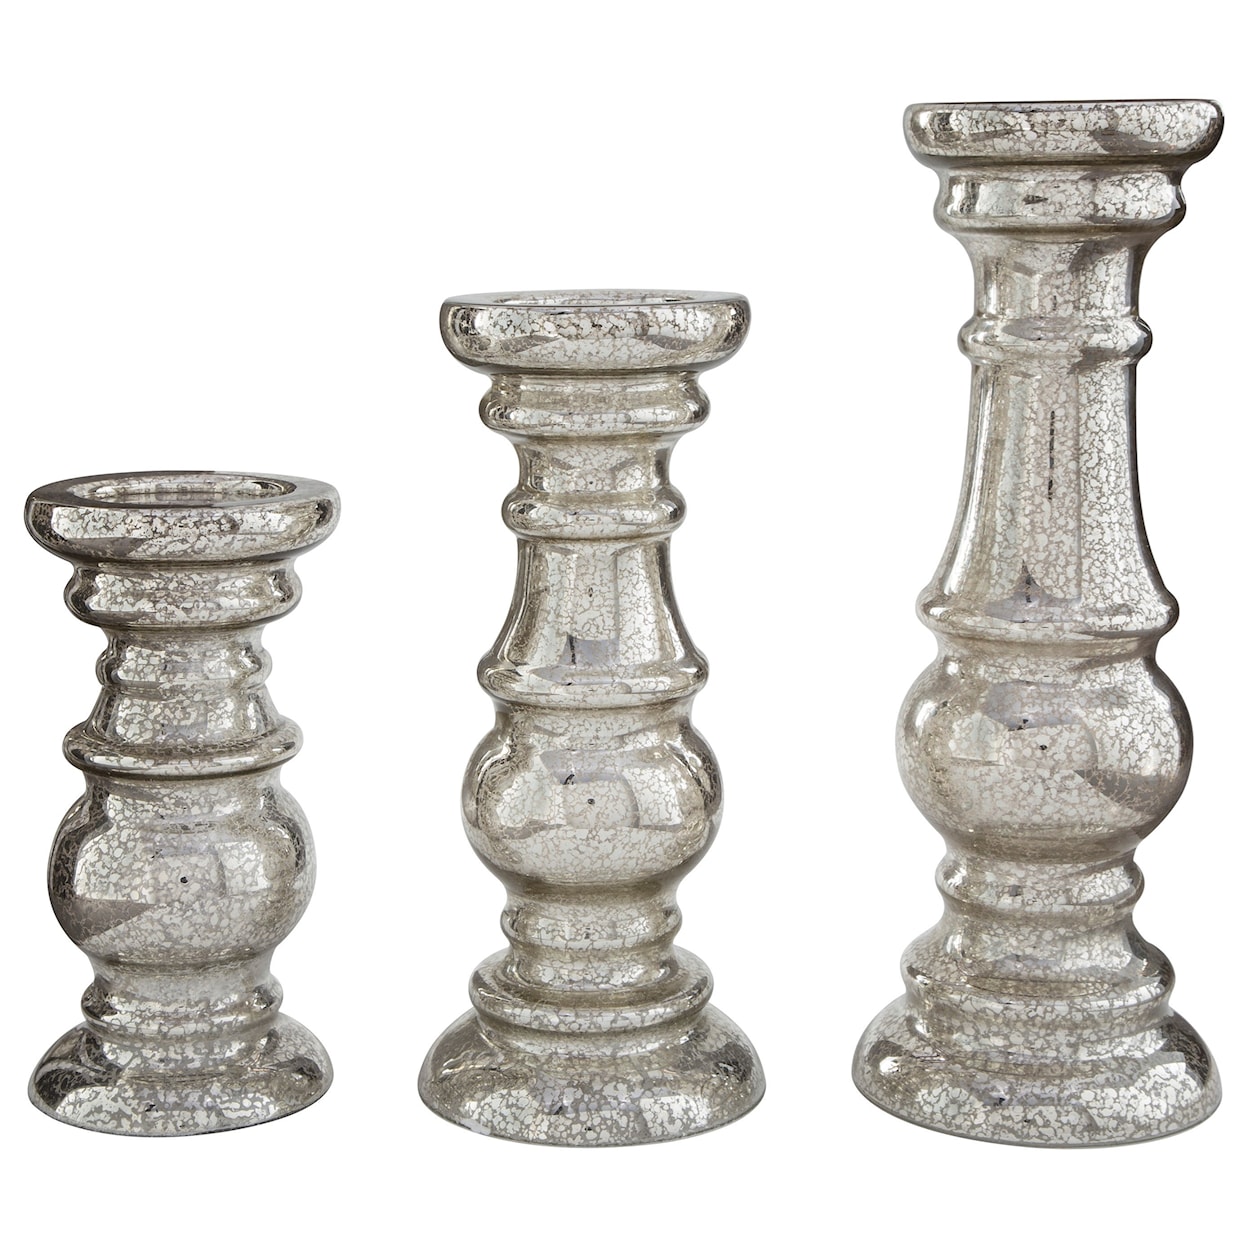 Michael Alan Select Accents Rosario Silver Finish Candle Holder Set